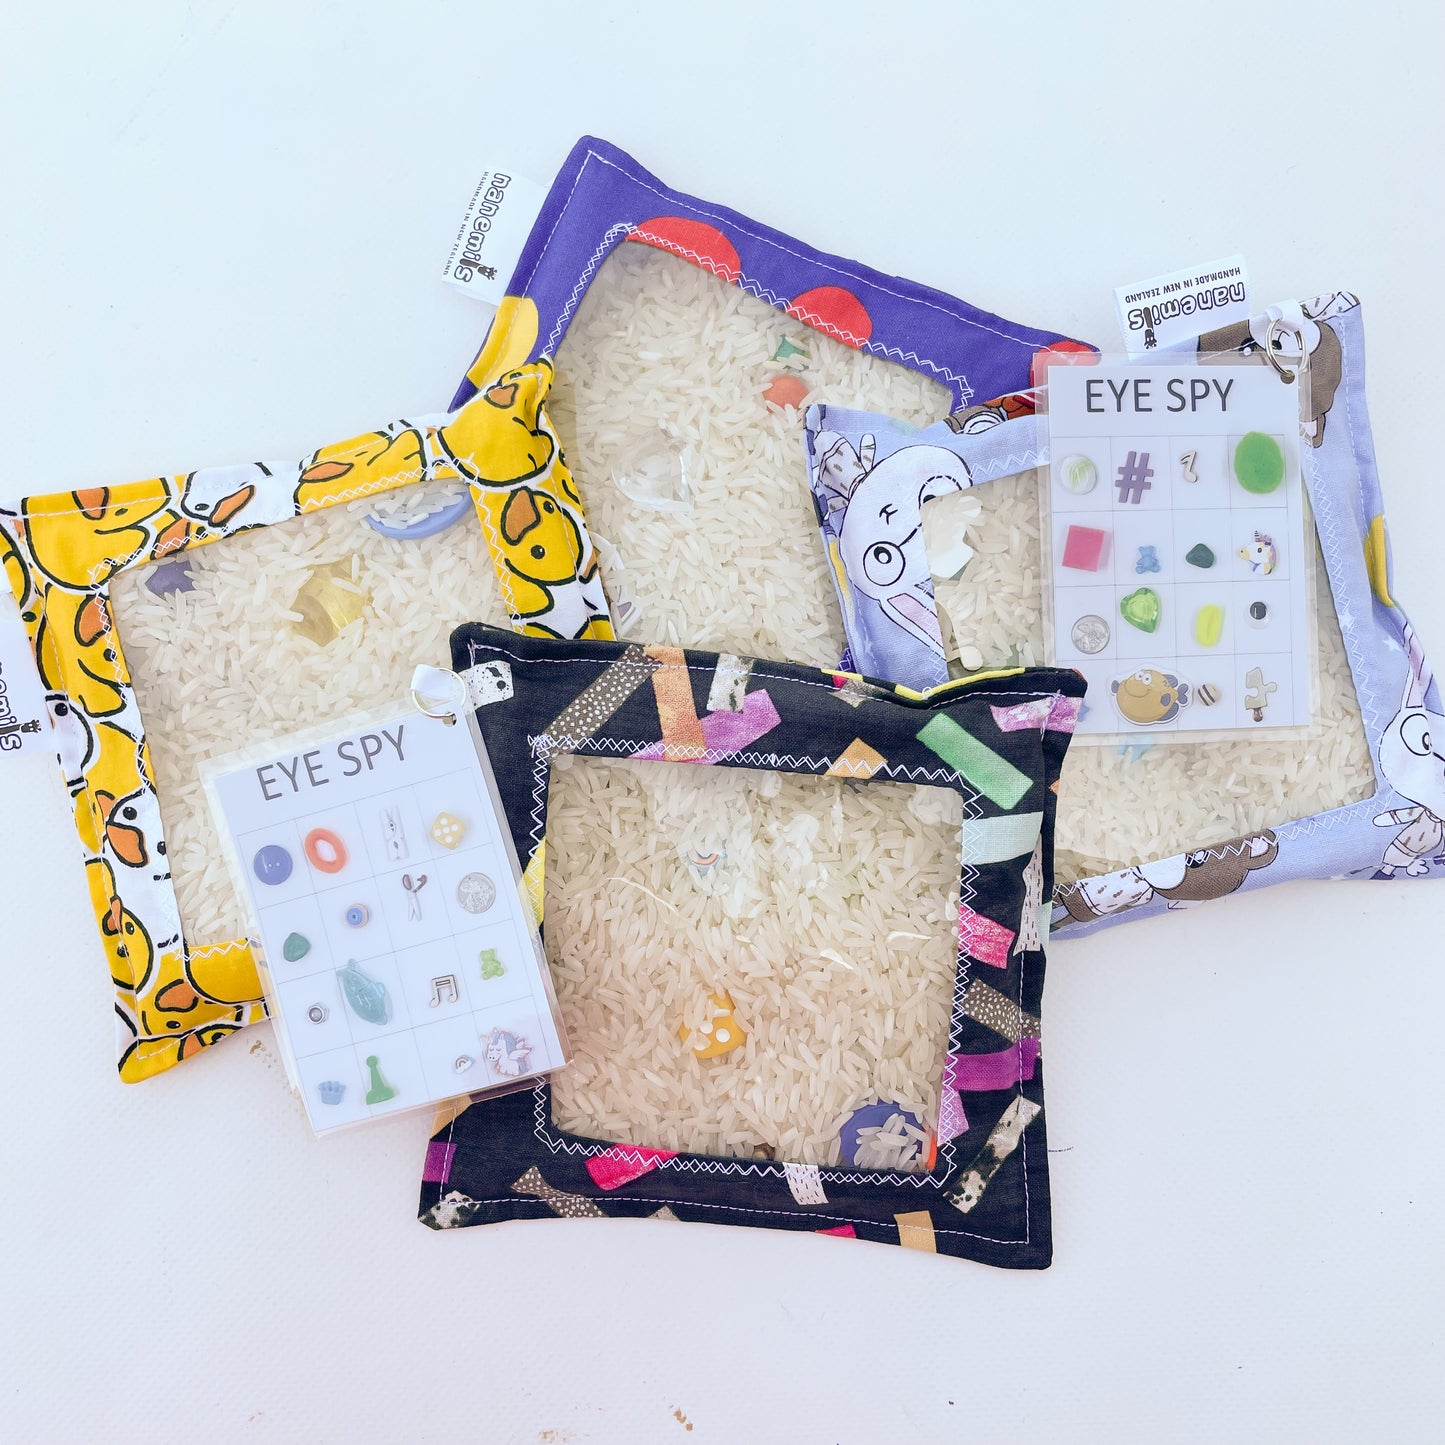 Childrens Eye Spy sensory discovery bags with clear plastic window and filled with rice and mystery objects to find.